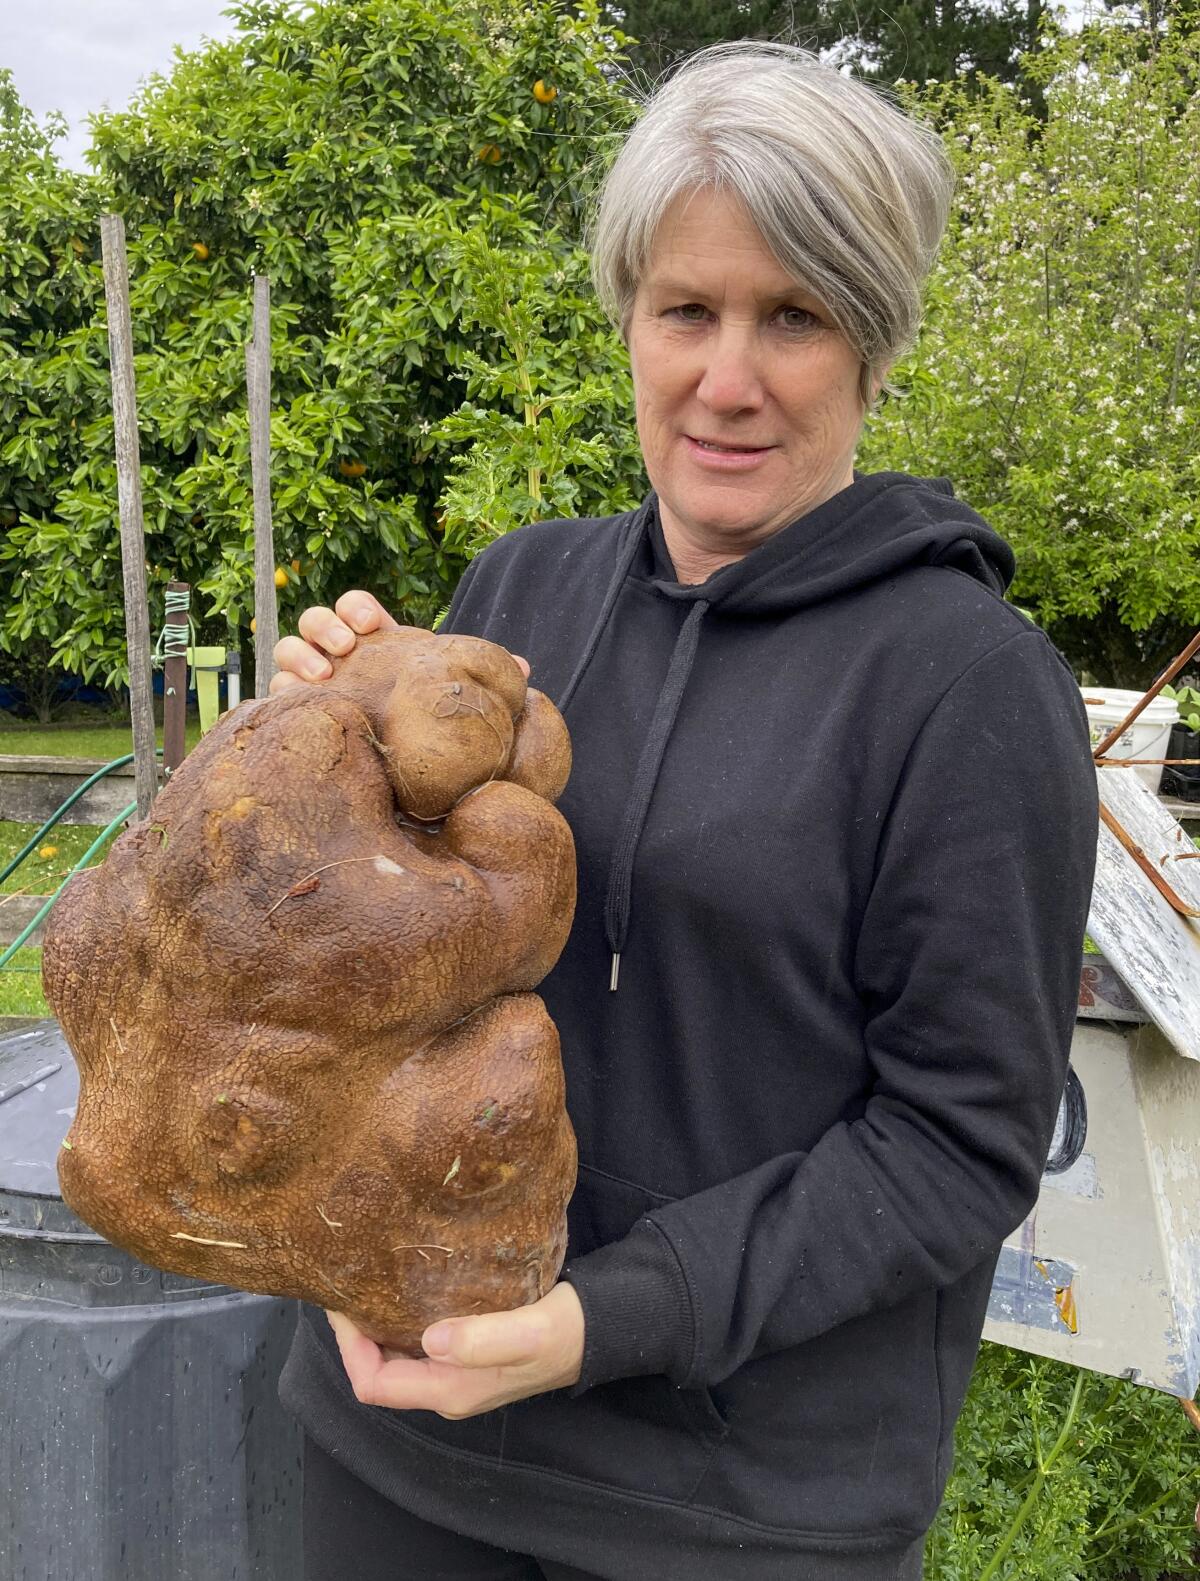 Donna Craig-Brown holds a large potato dug from her garden at her home near Hamilton, New Zealand Wednesday, Nov. 3, 2021. A New Zealand couple dug up a potato the size of a small dog in their backyard and have applied for recognition from Guinness World Records. They say it weighed in at 7.9 kilograms (17 pounds), well above the current record of just under 5 kg. They've named the potato Doug, because they dug it up. (Colin Craig-Brown via AP)